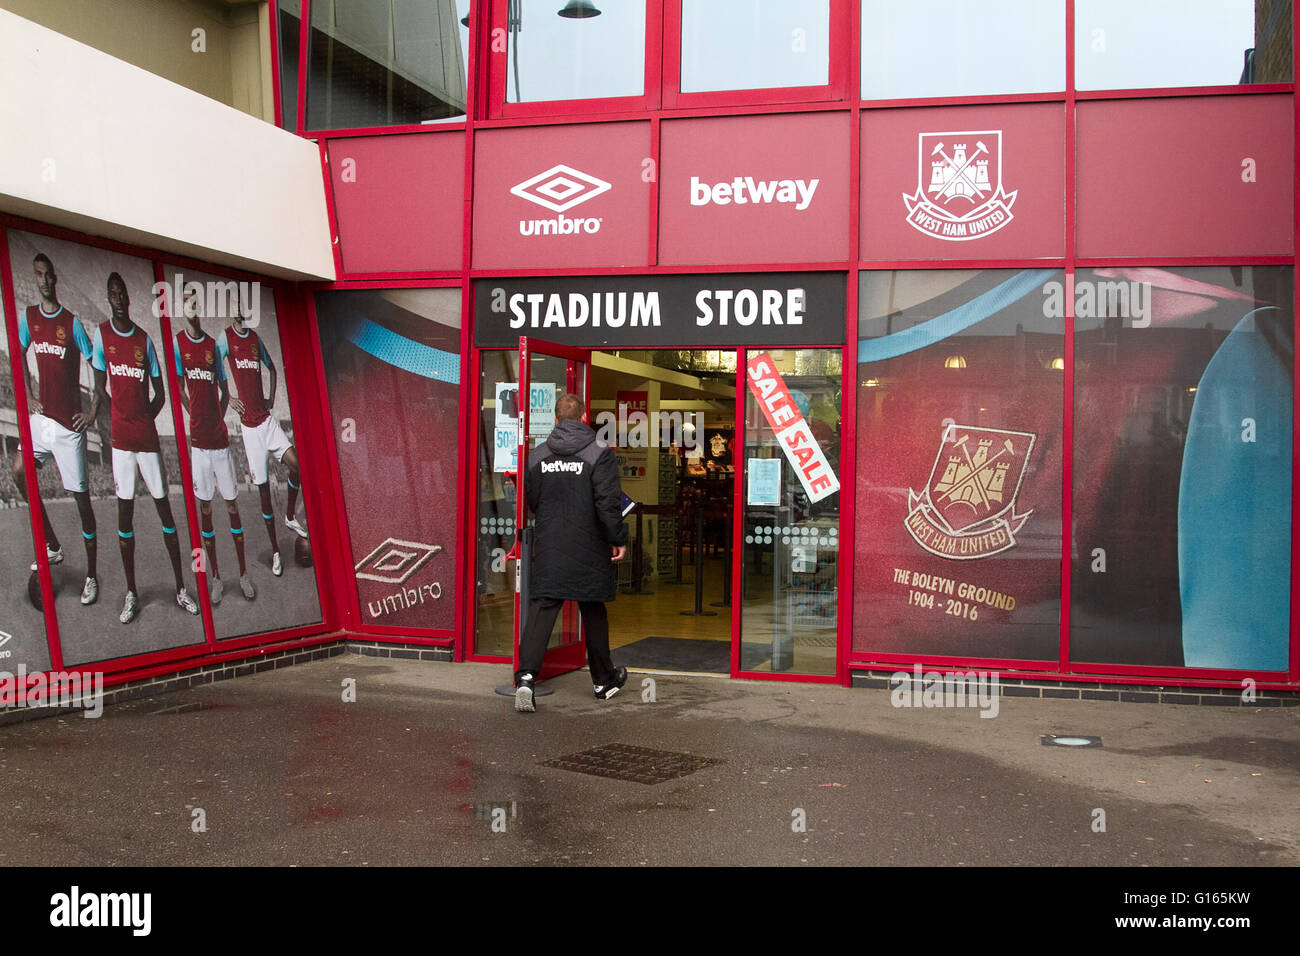 Upton Park London, UK. 10th May. A staff member walks into the Stock Photo: 104013053 - Alamy